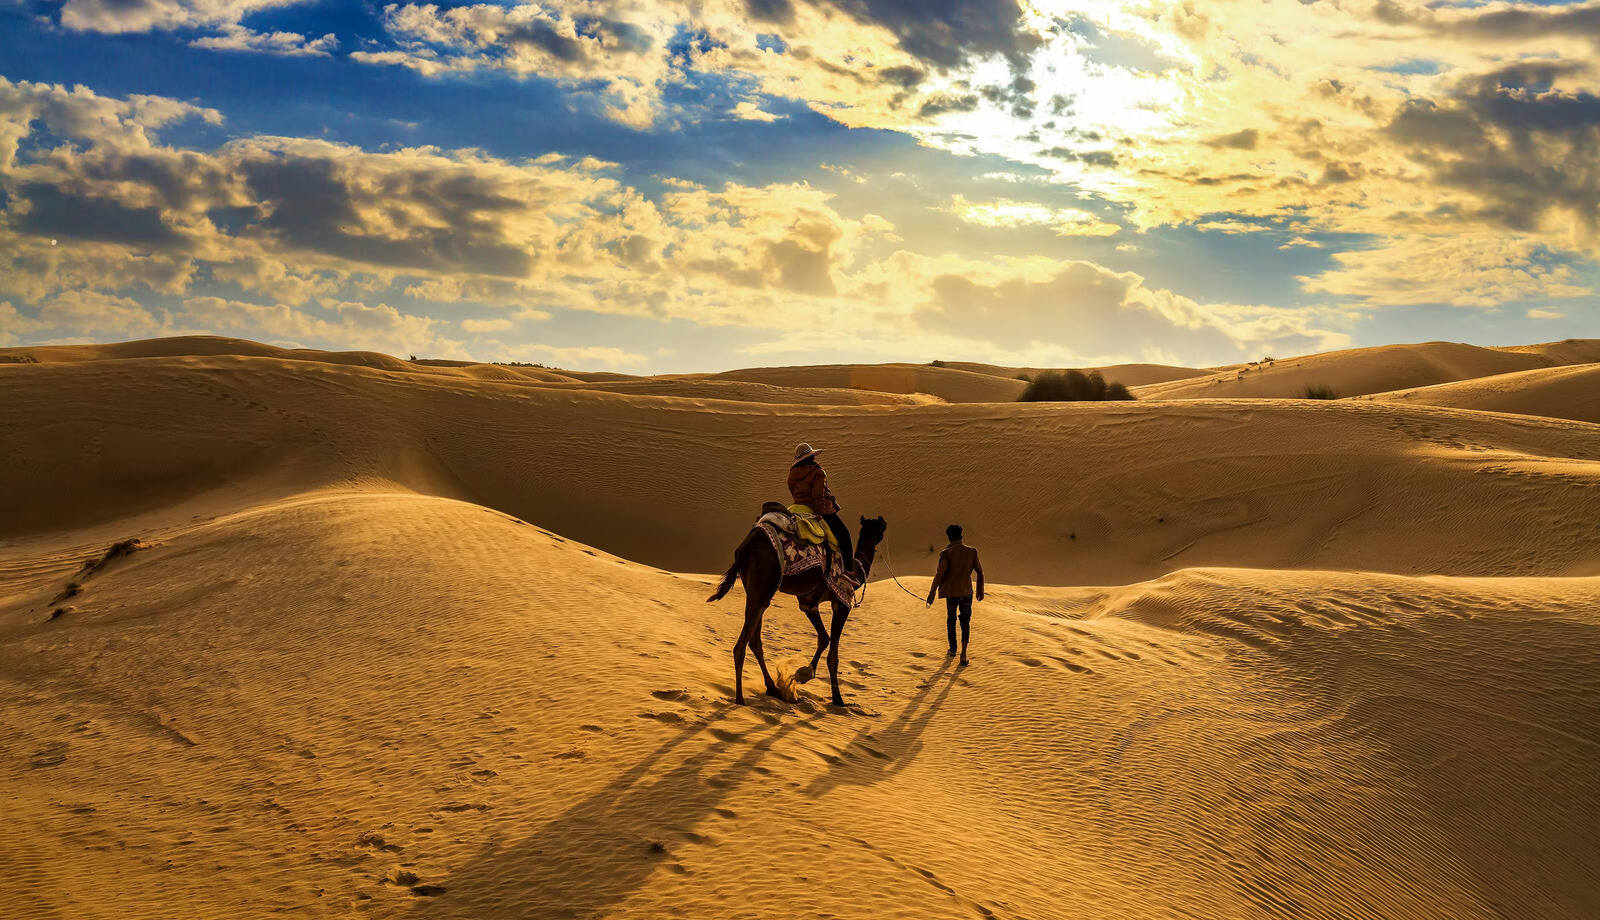 10 Facts About The Thar Desert - Facts.net